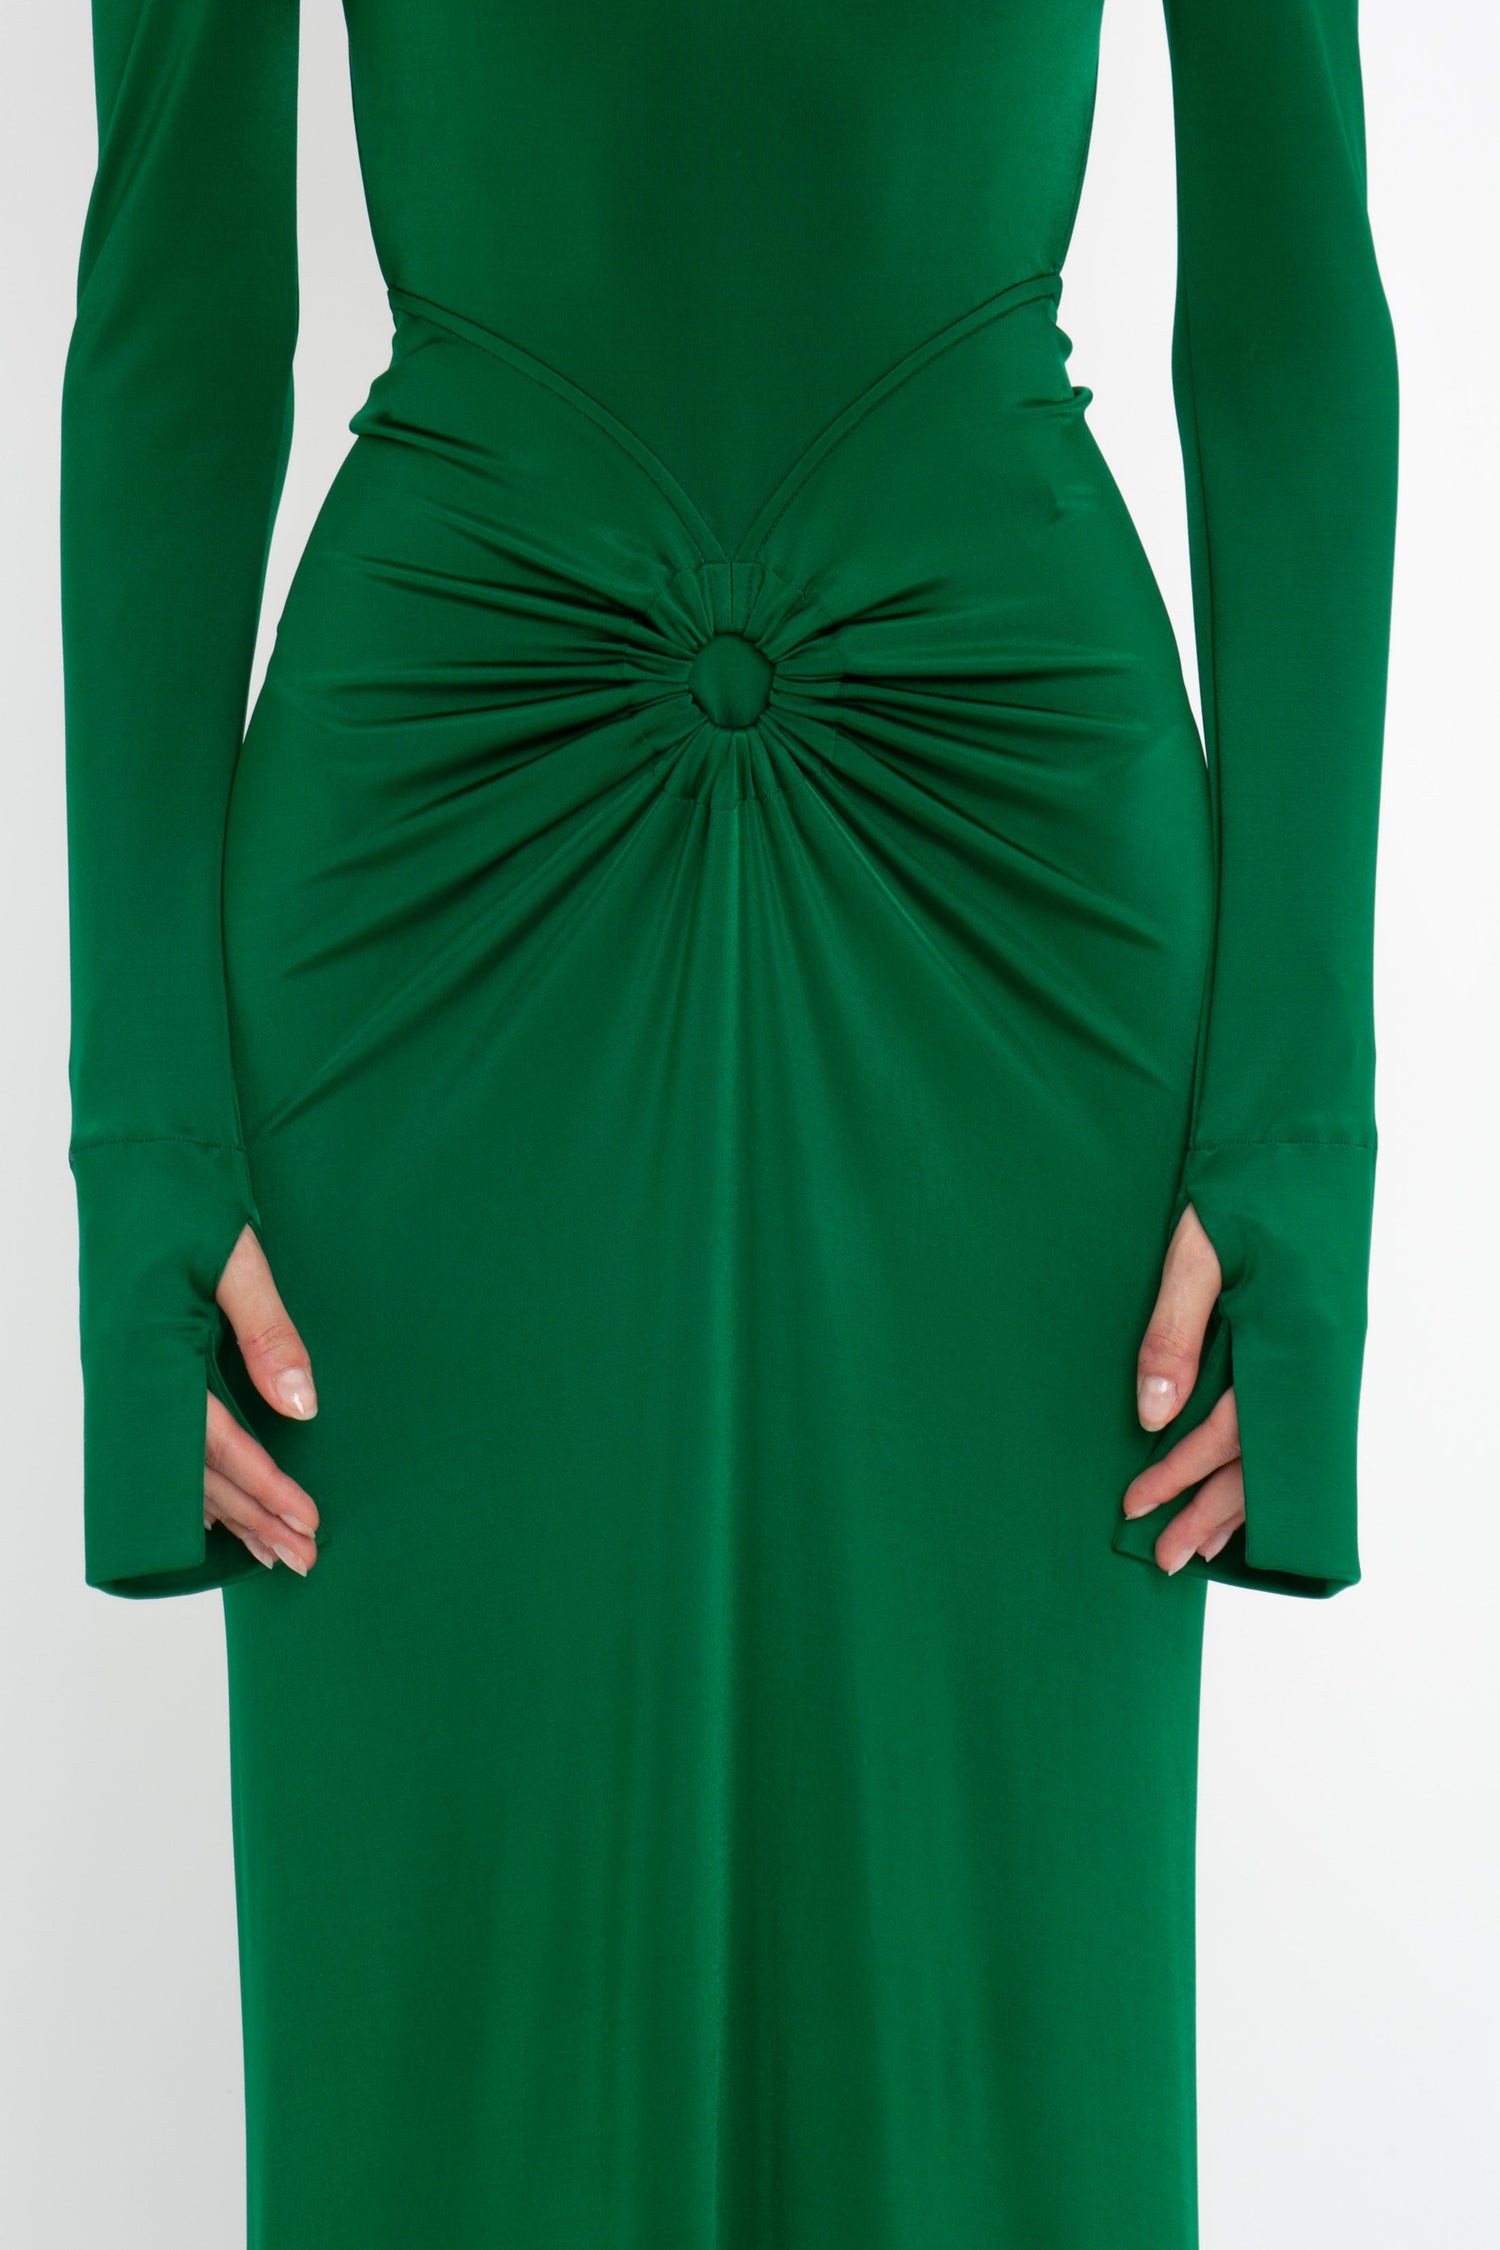 Person wearing a Circle Detail Open Back Gown in Emerald by Victoria Beckham. Hands are partially visible, resting against the sides of the dress.